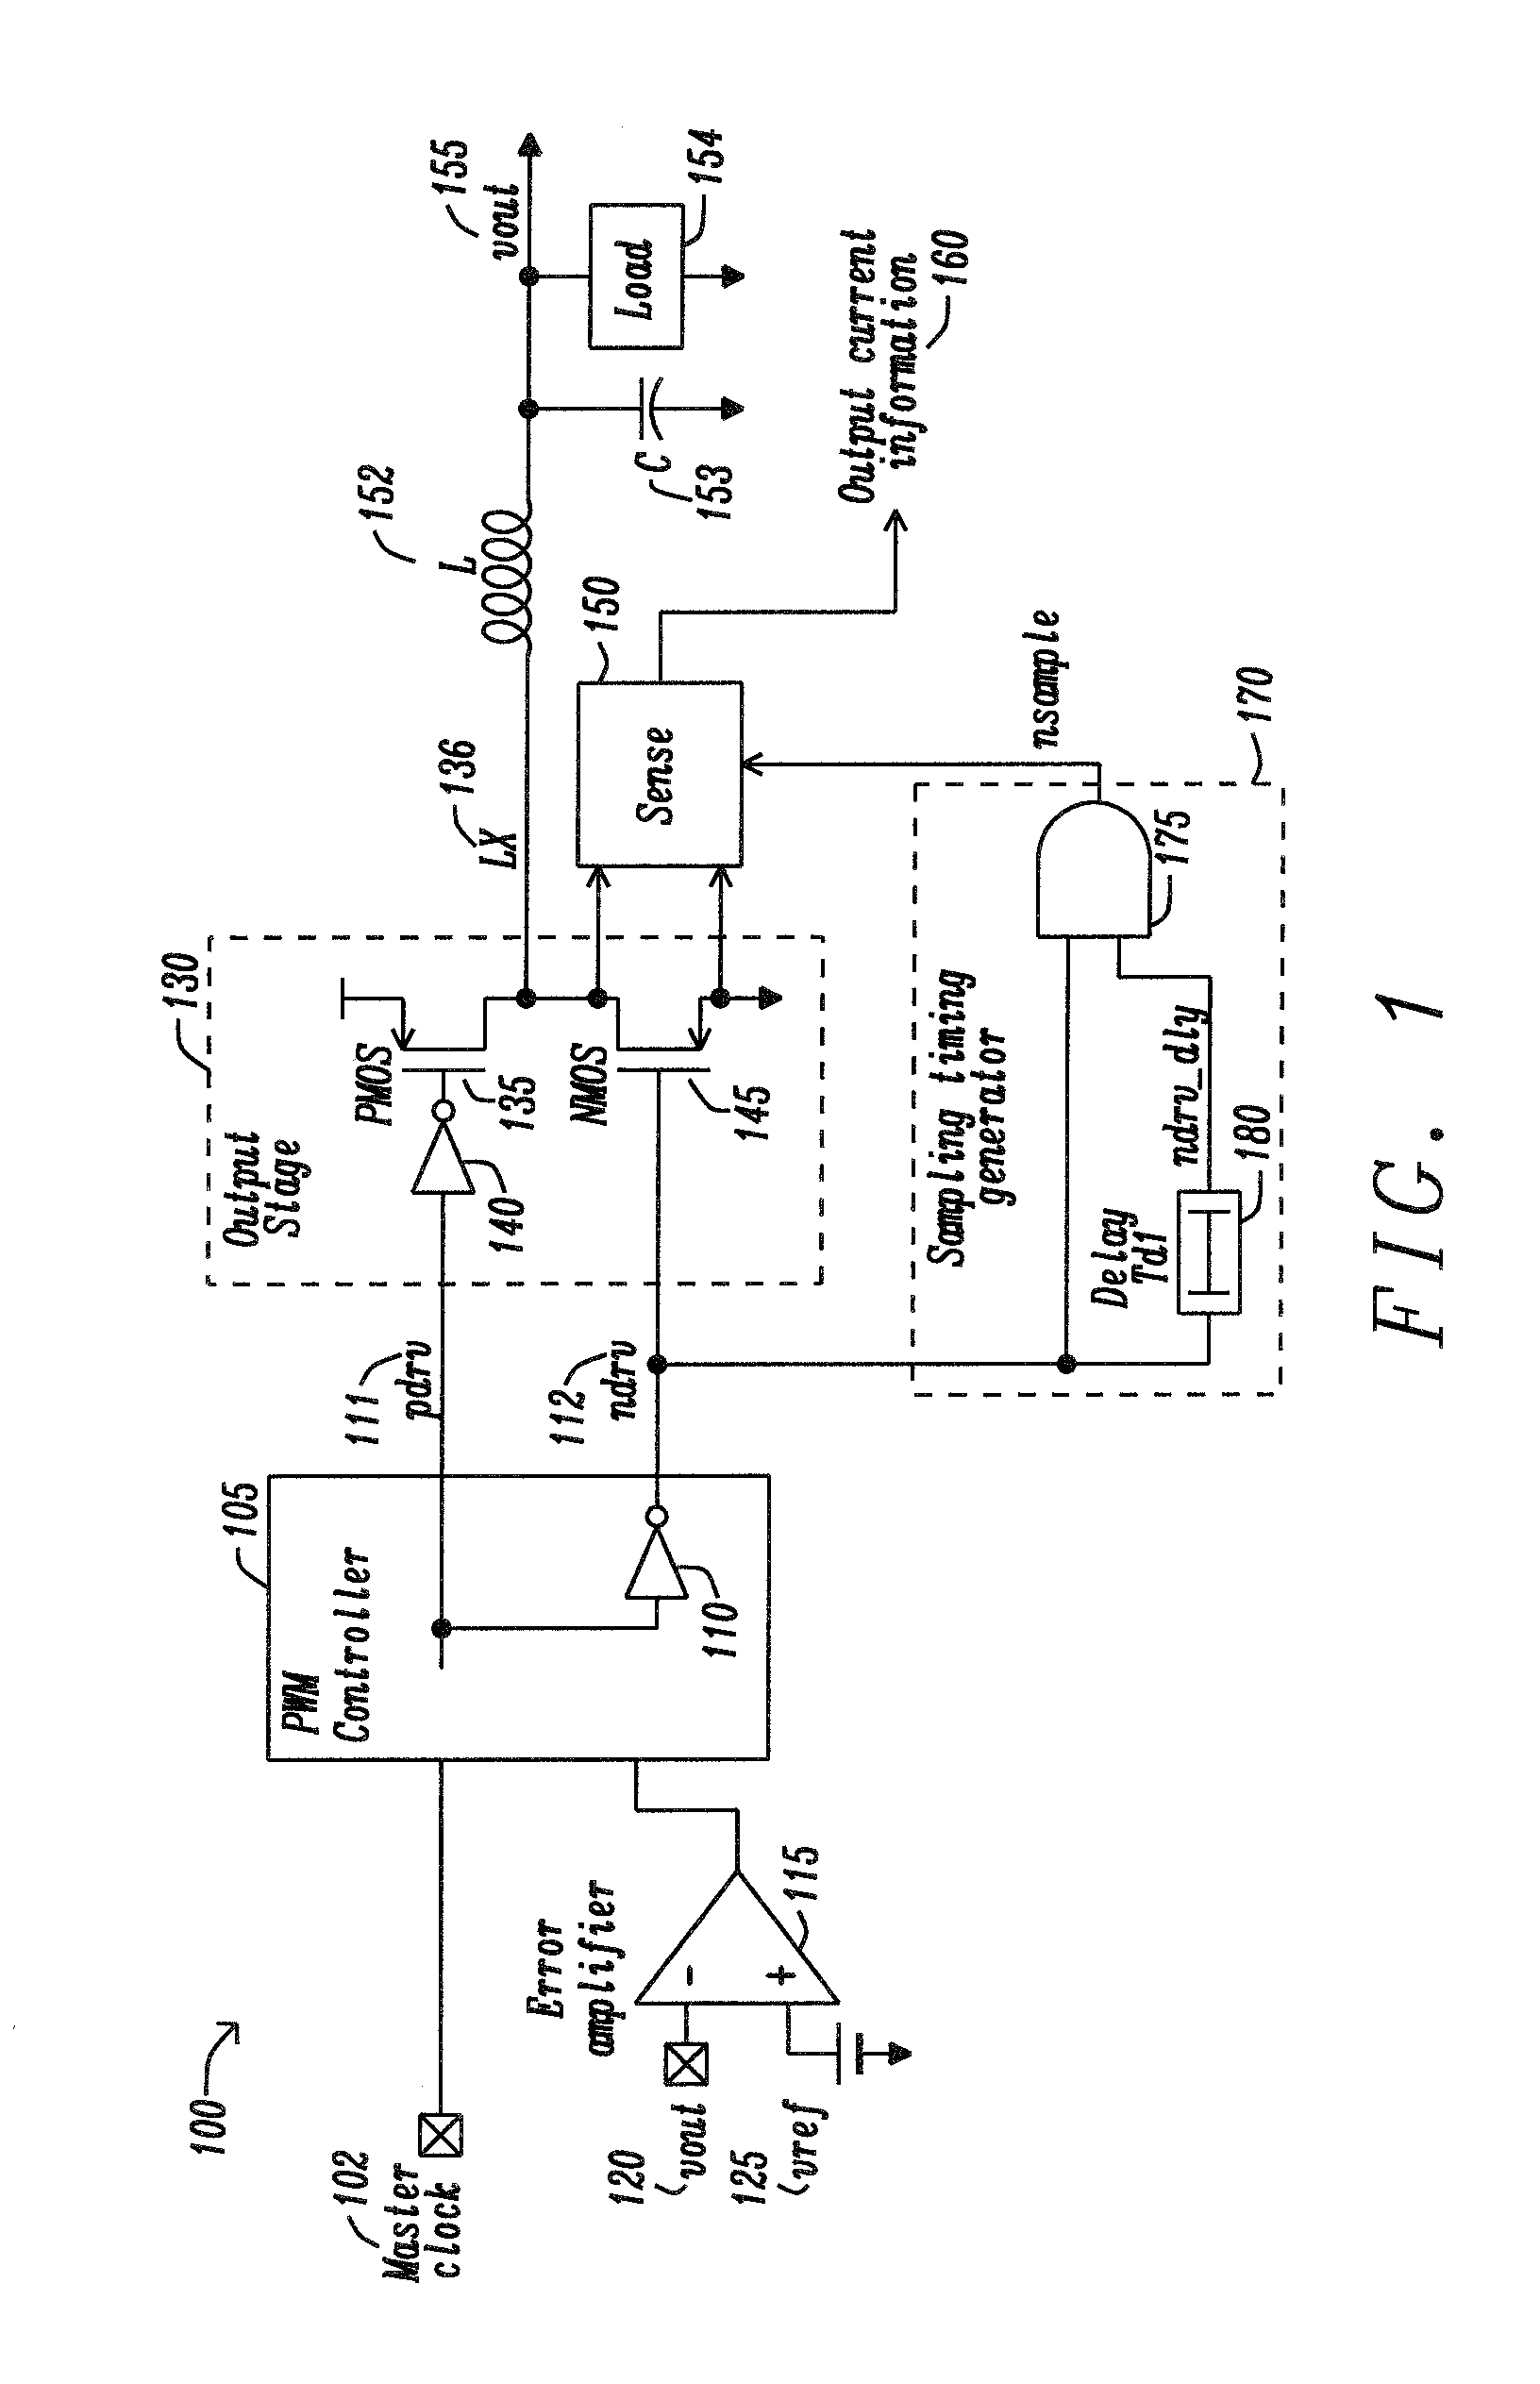 Output Current Monitor Circuit for Switching Regulator